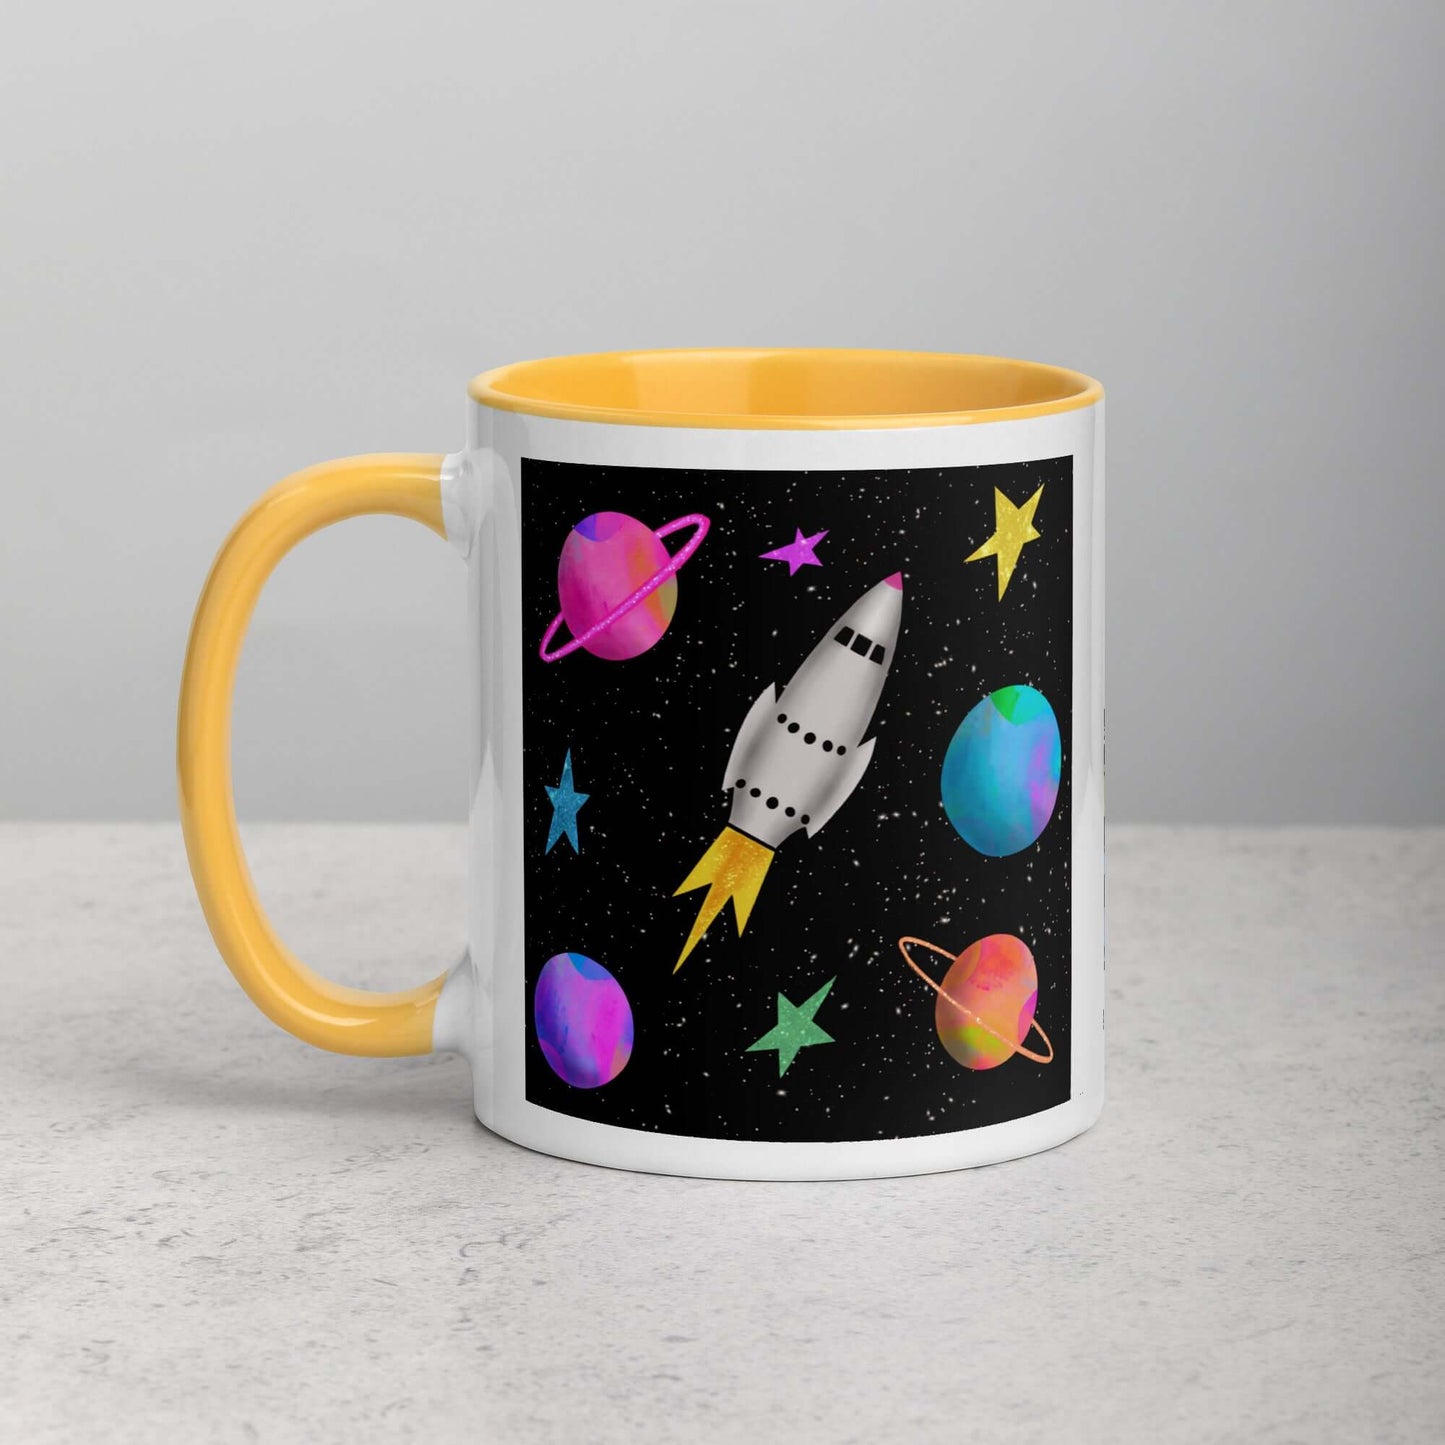 Whimsical Space Rocket with Colorful Planets and Stars on Black Background “Space Rockets” Mug with Golden Yellow Color Inside Left Handed Front View